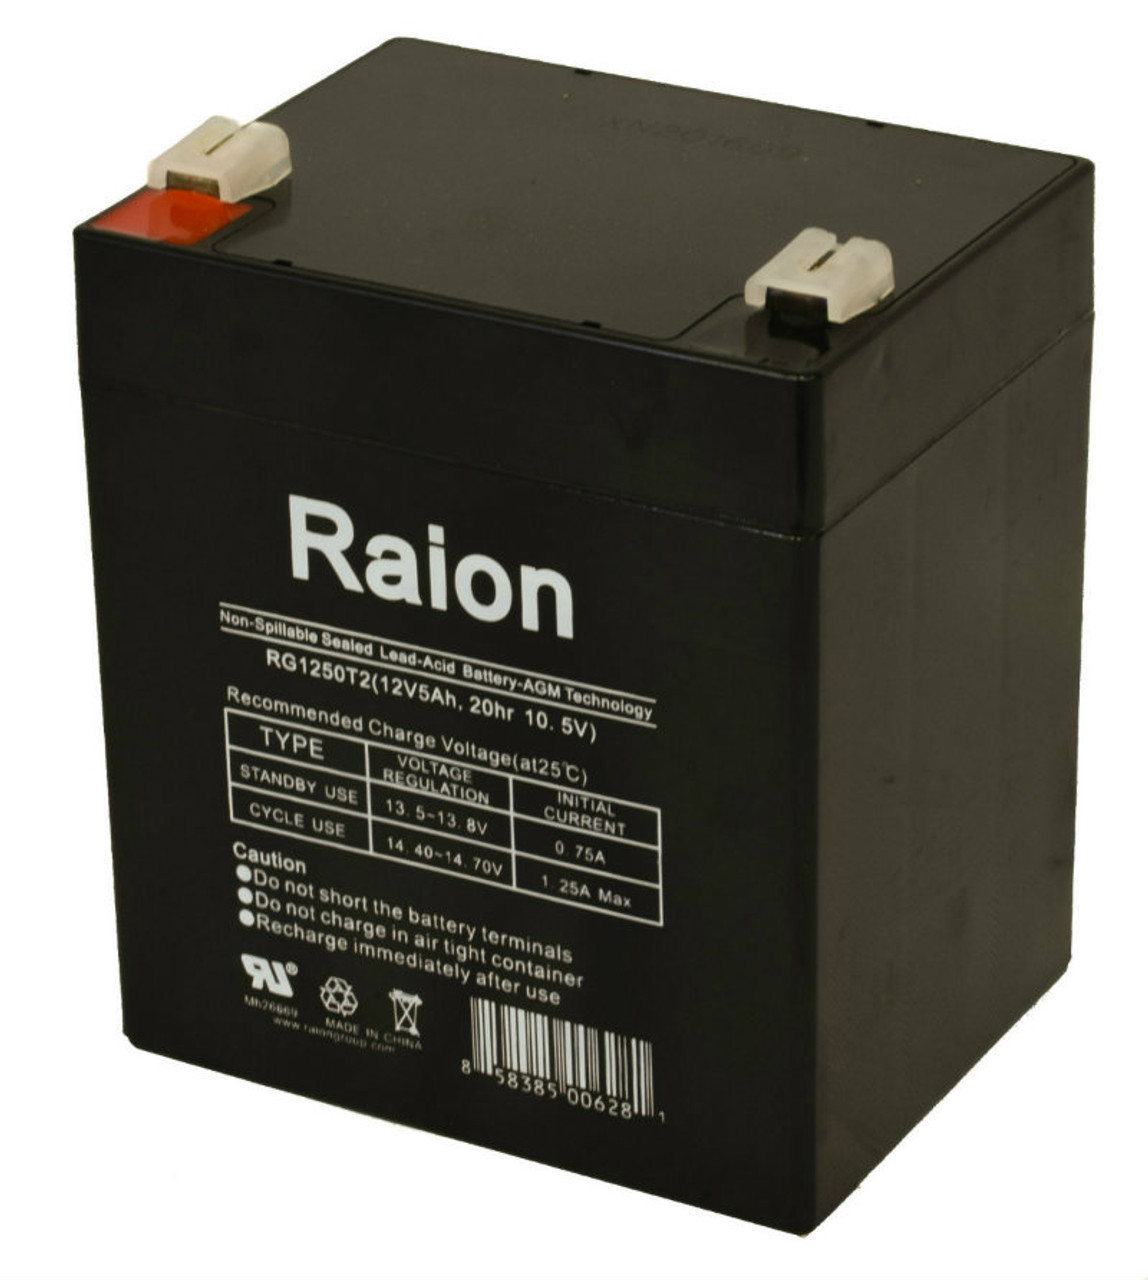 Raion Power RG1250T1 Replacement Fire Alarm Control Panel Battery for Securitron 62